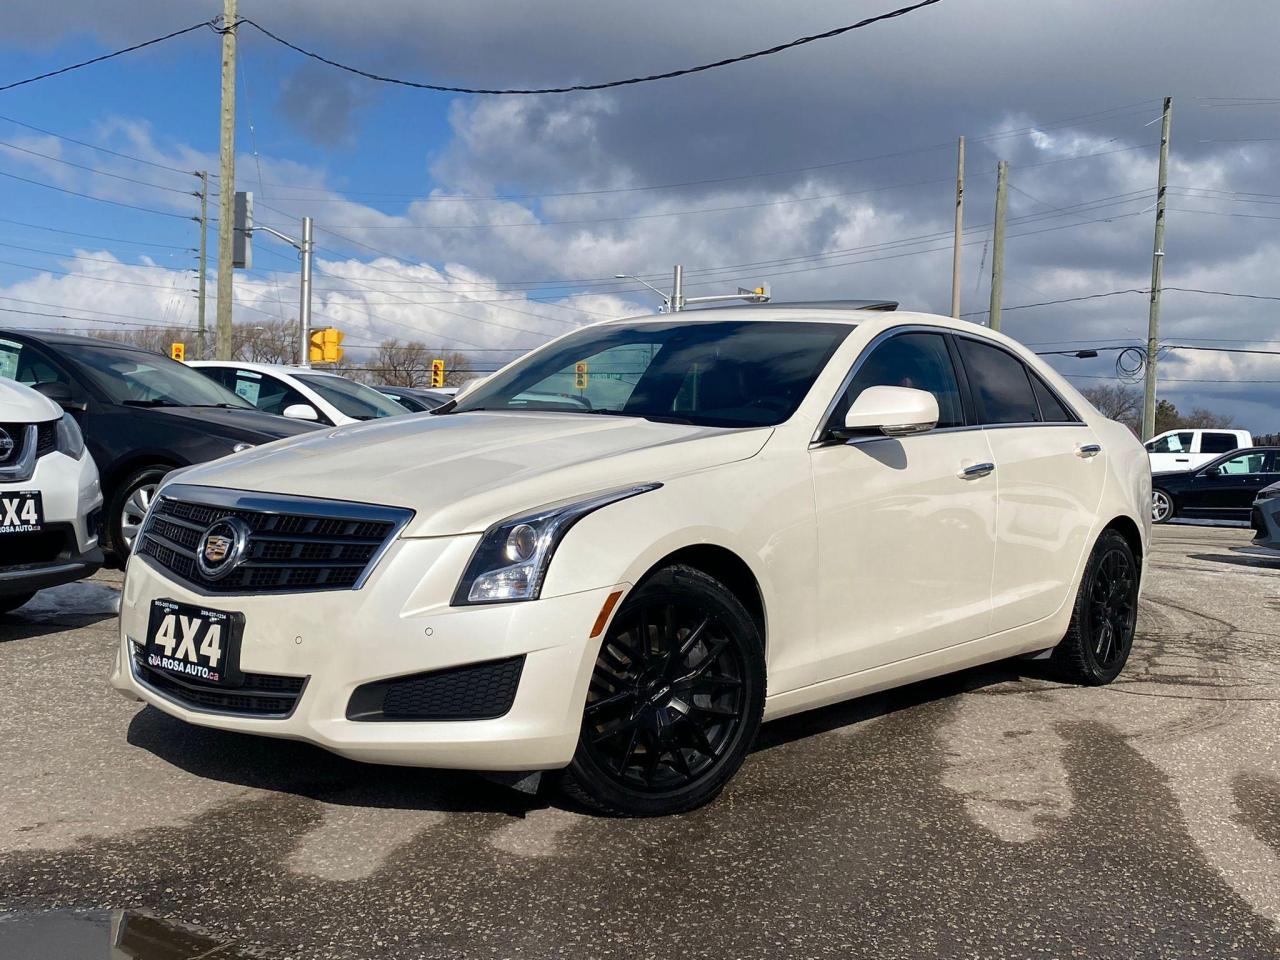 2014 Cadillac ATS 4dr Sdn 2.0L AWD NAVIGATION RED LEATHER NO ACCIDEN - Photo #3